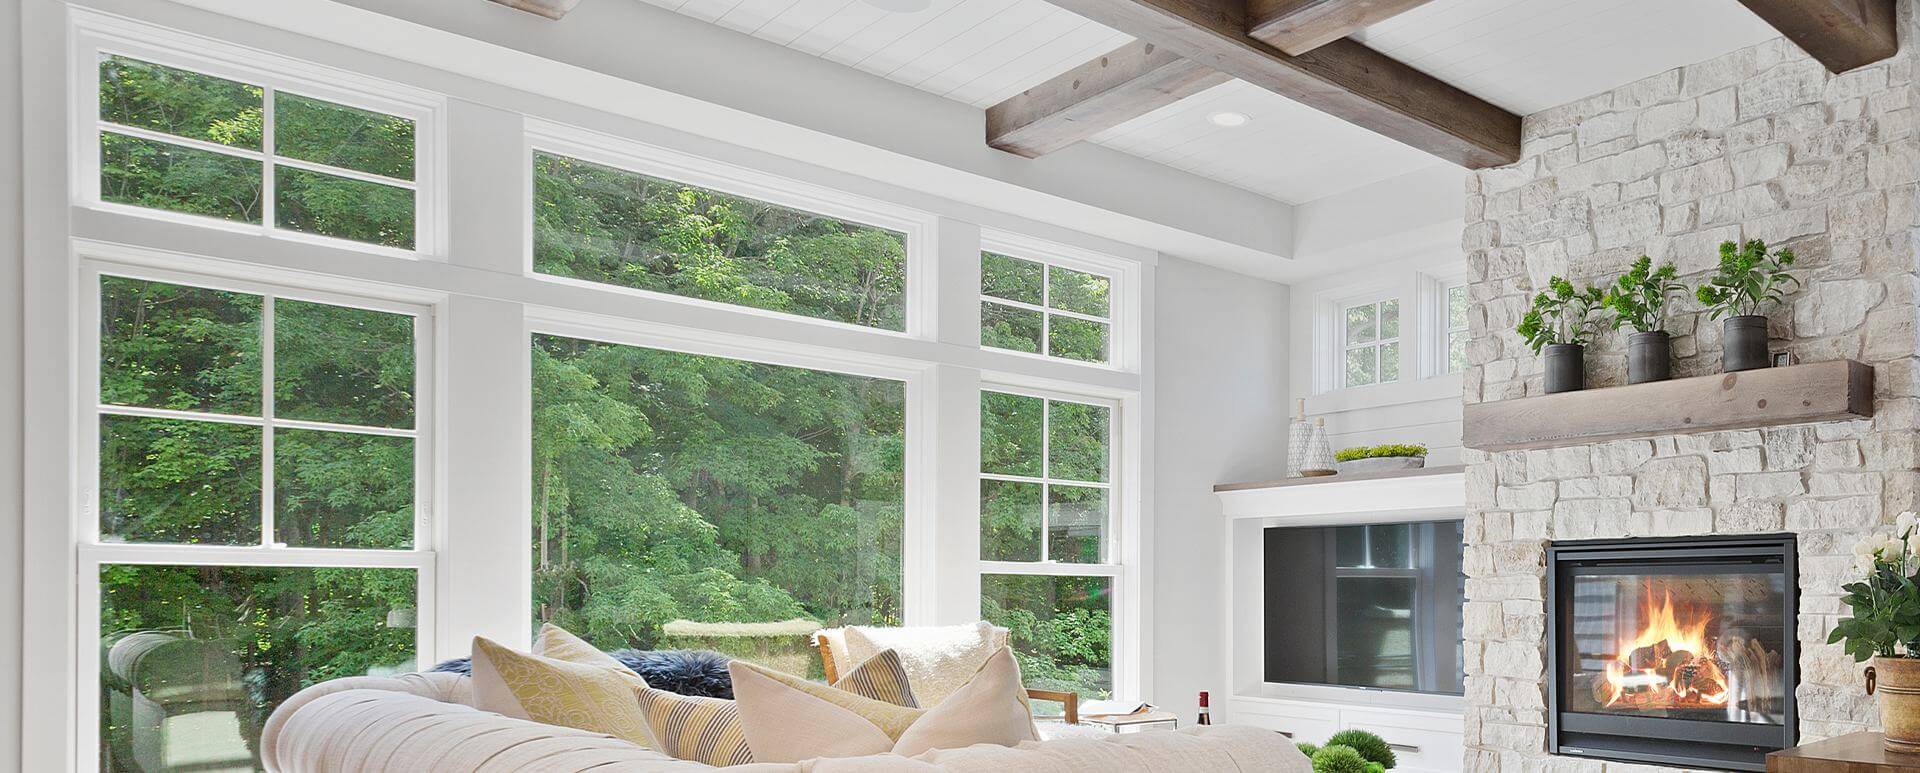 Transom windows above large windows in a living area that has a clear view of the outside